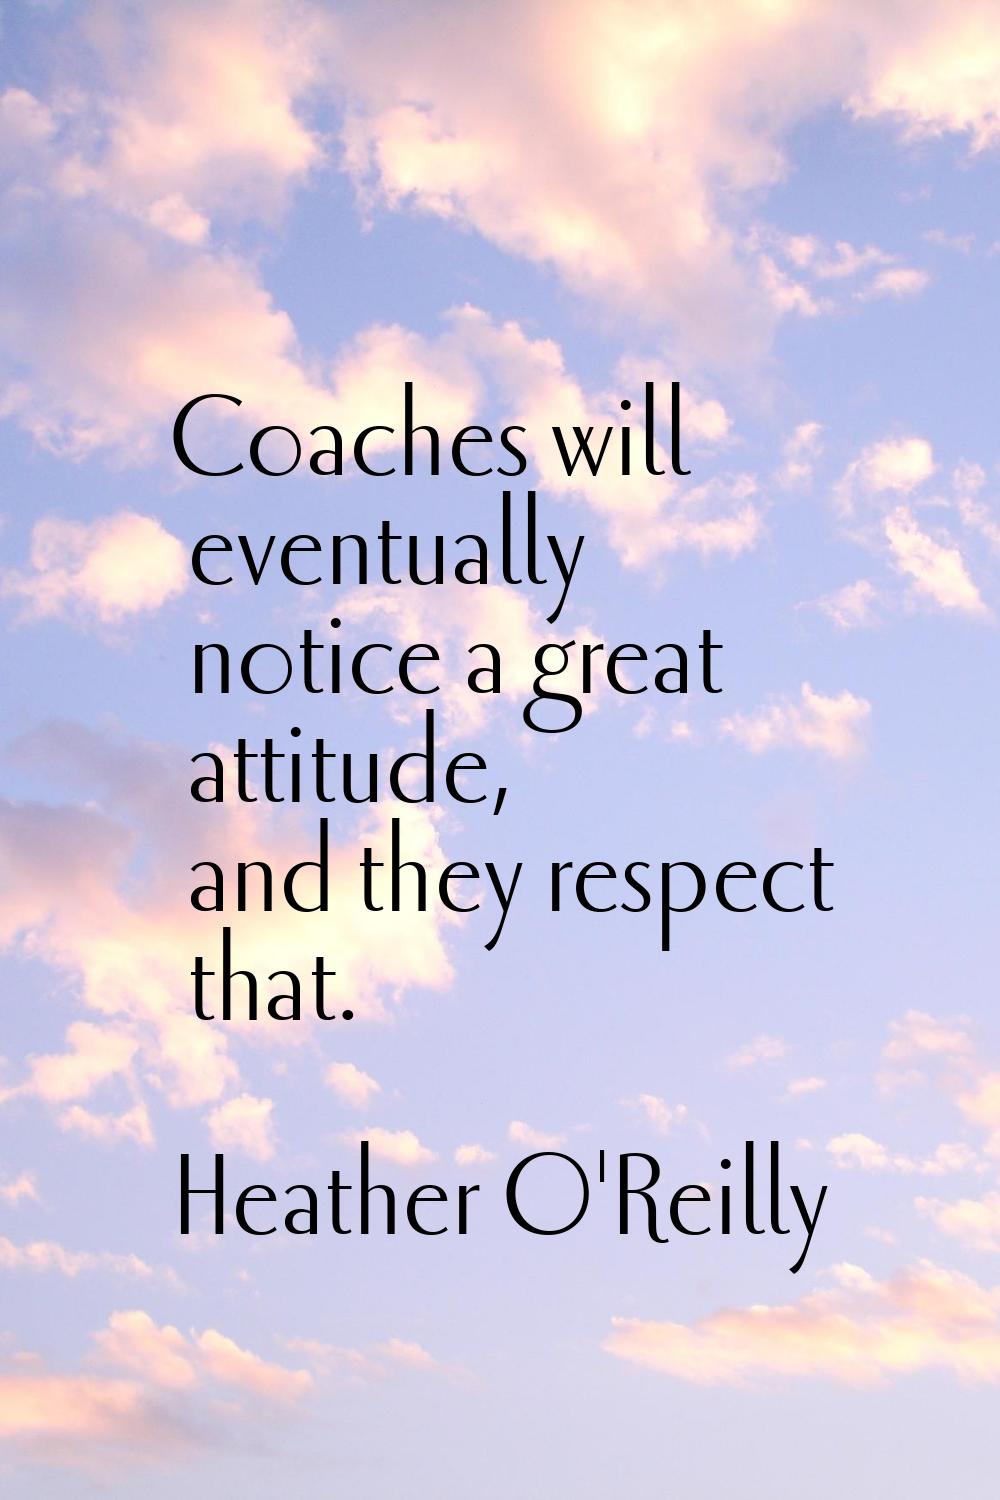 Coaches will eventually notice a great attitude, and they respect that.